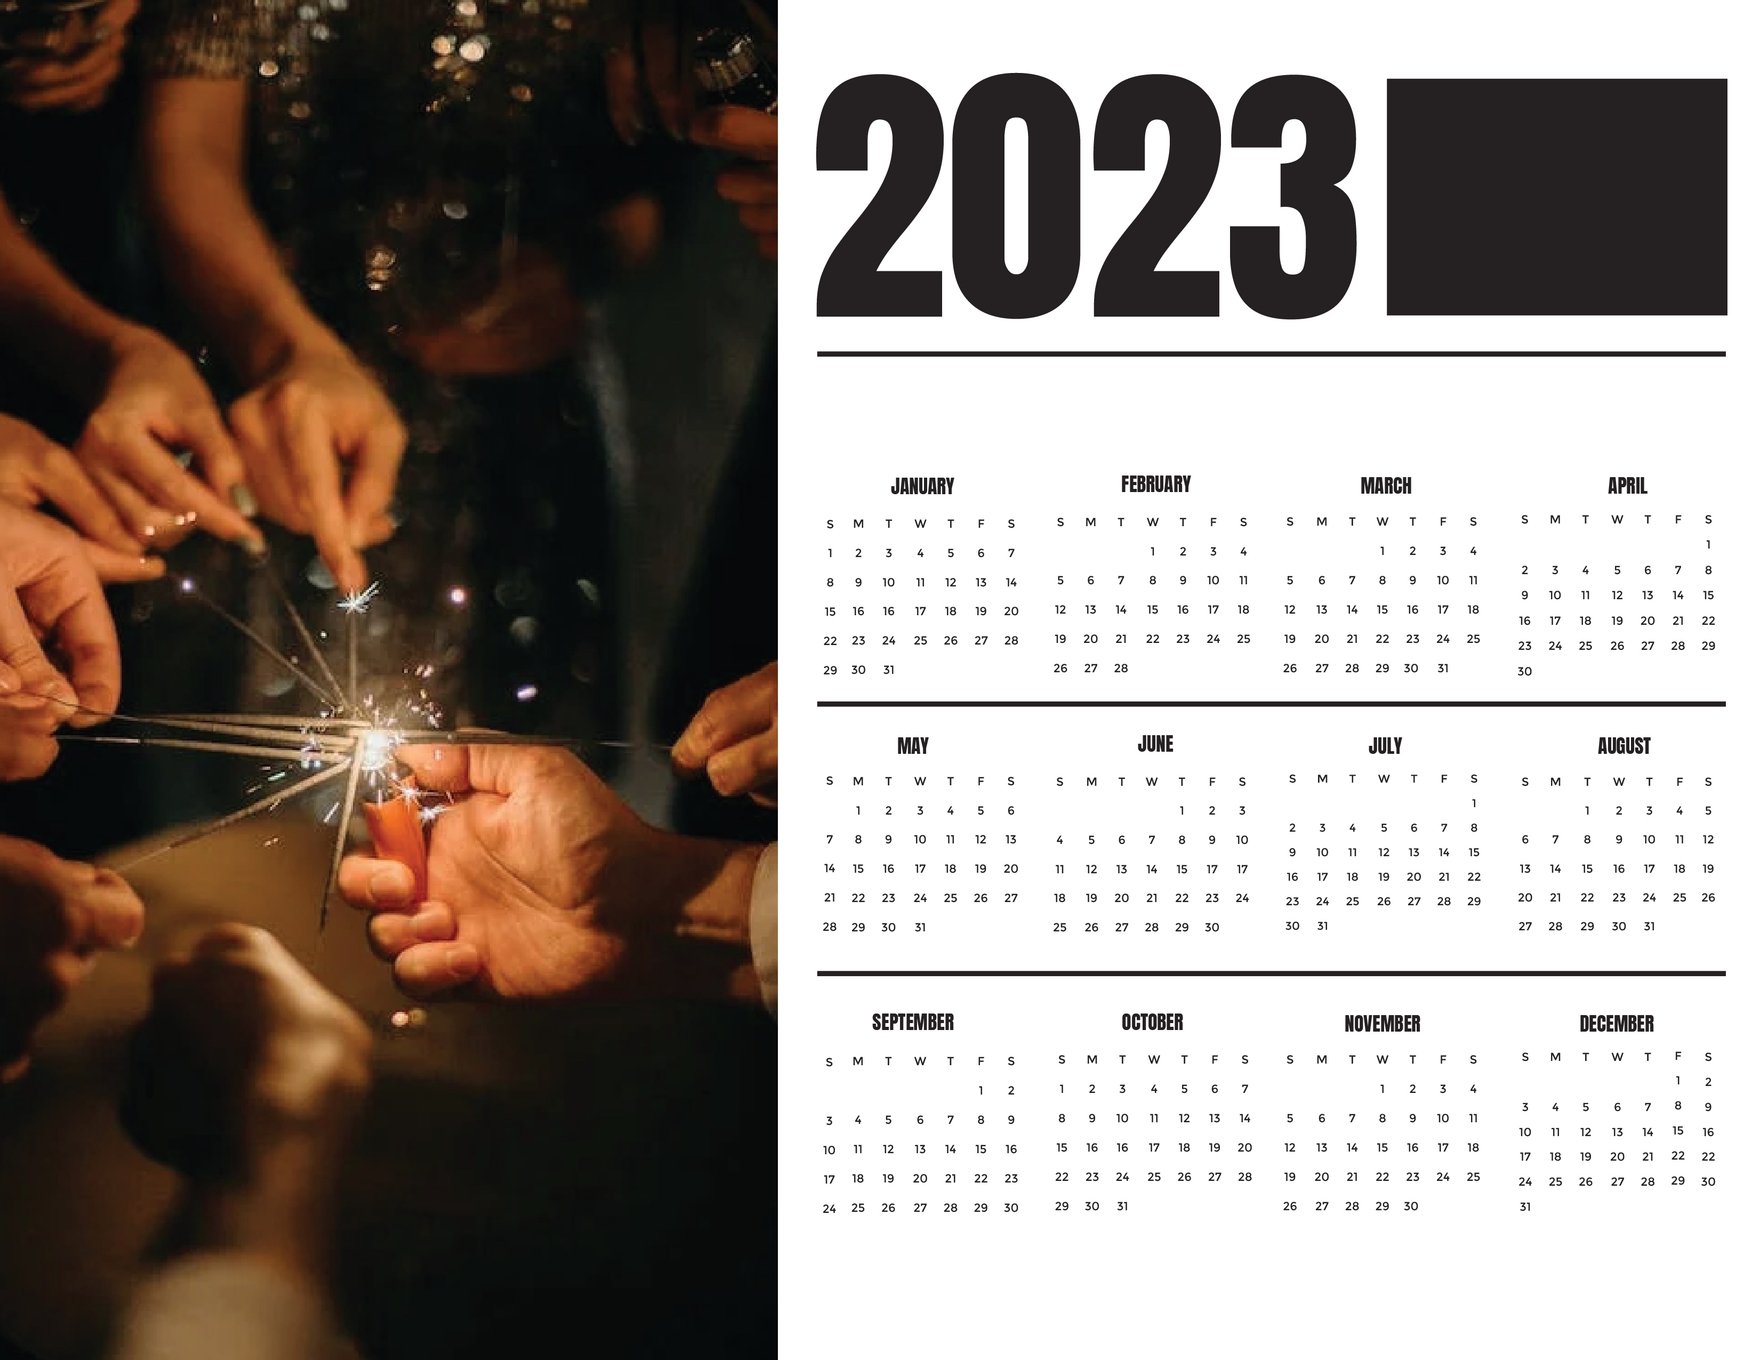 monthly-calendar-template-for-2023-year-2023-calendar-monthly